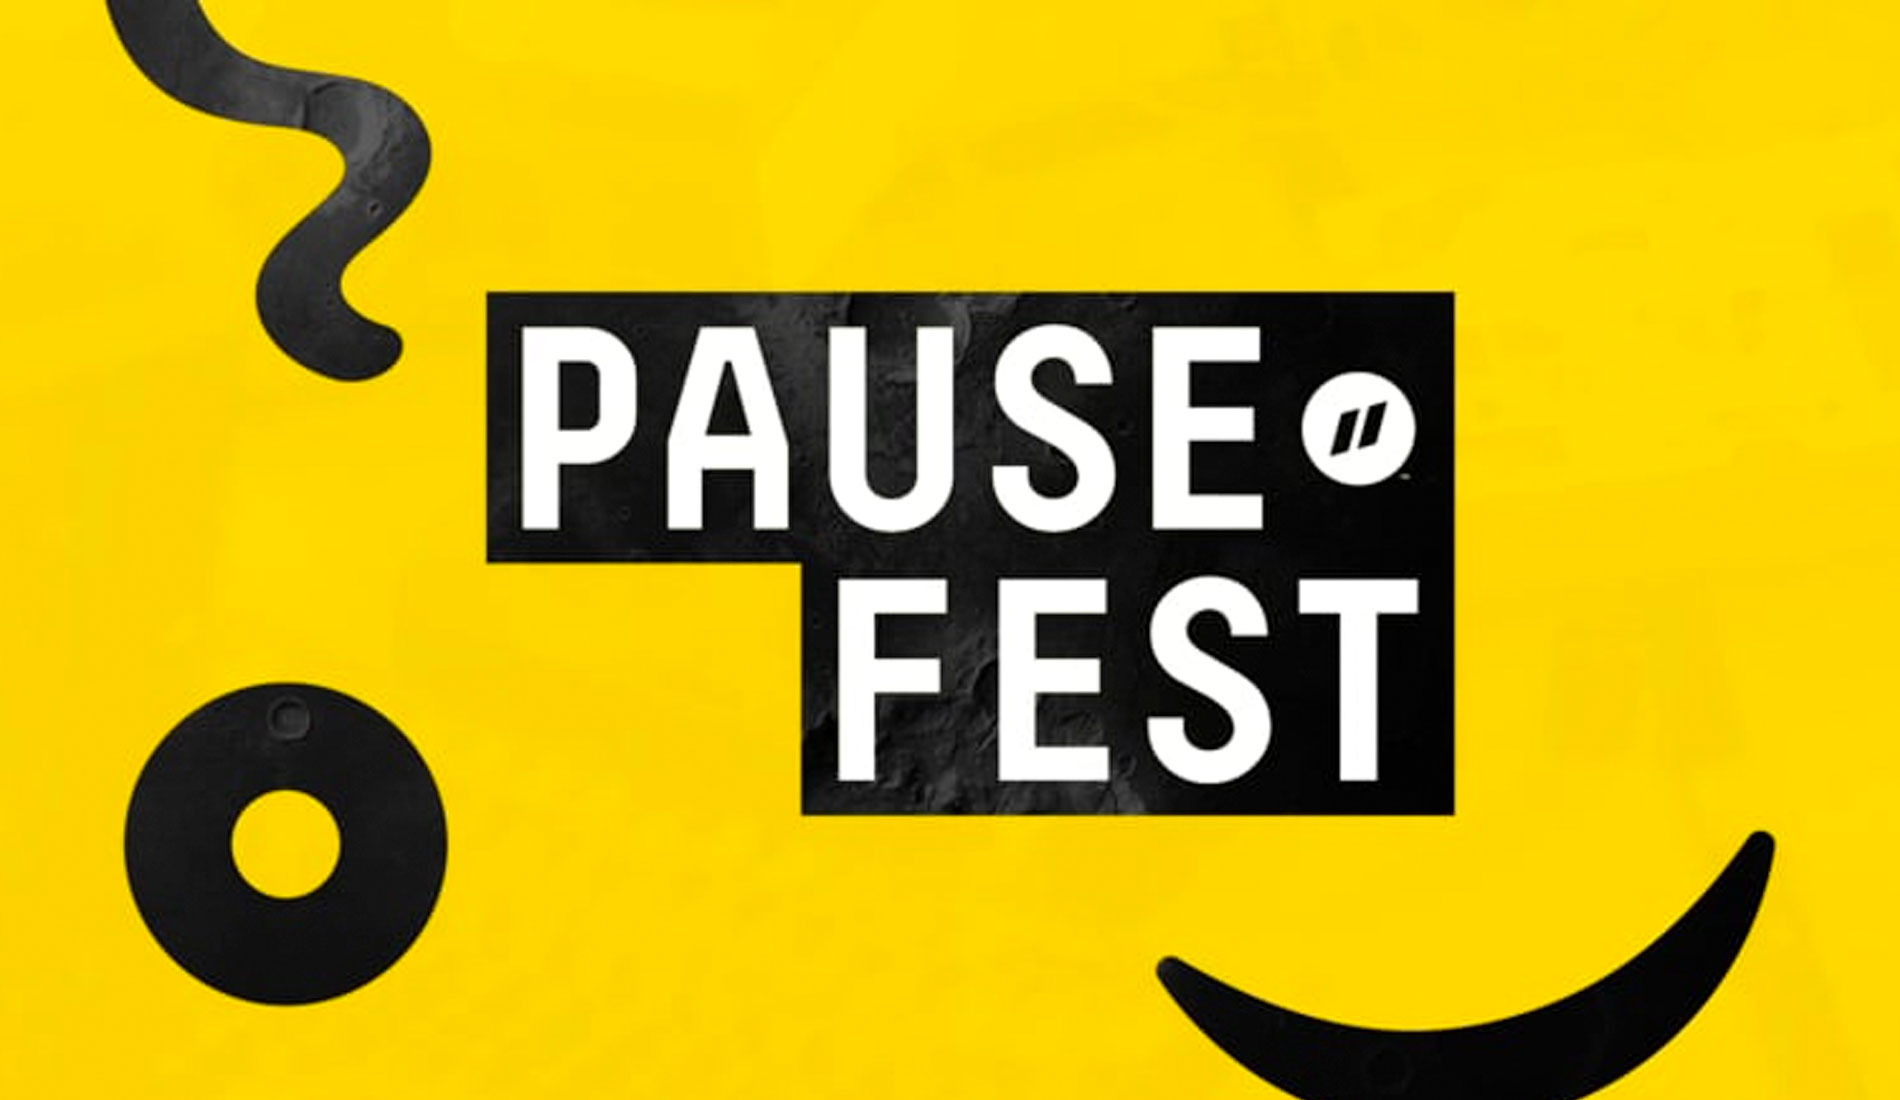 We're going to PauseFest. Are you?